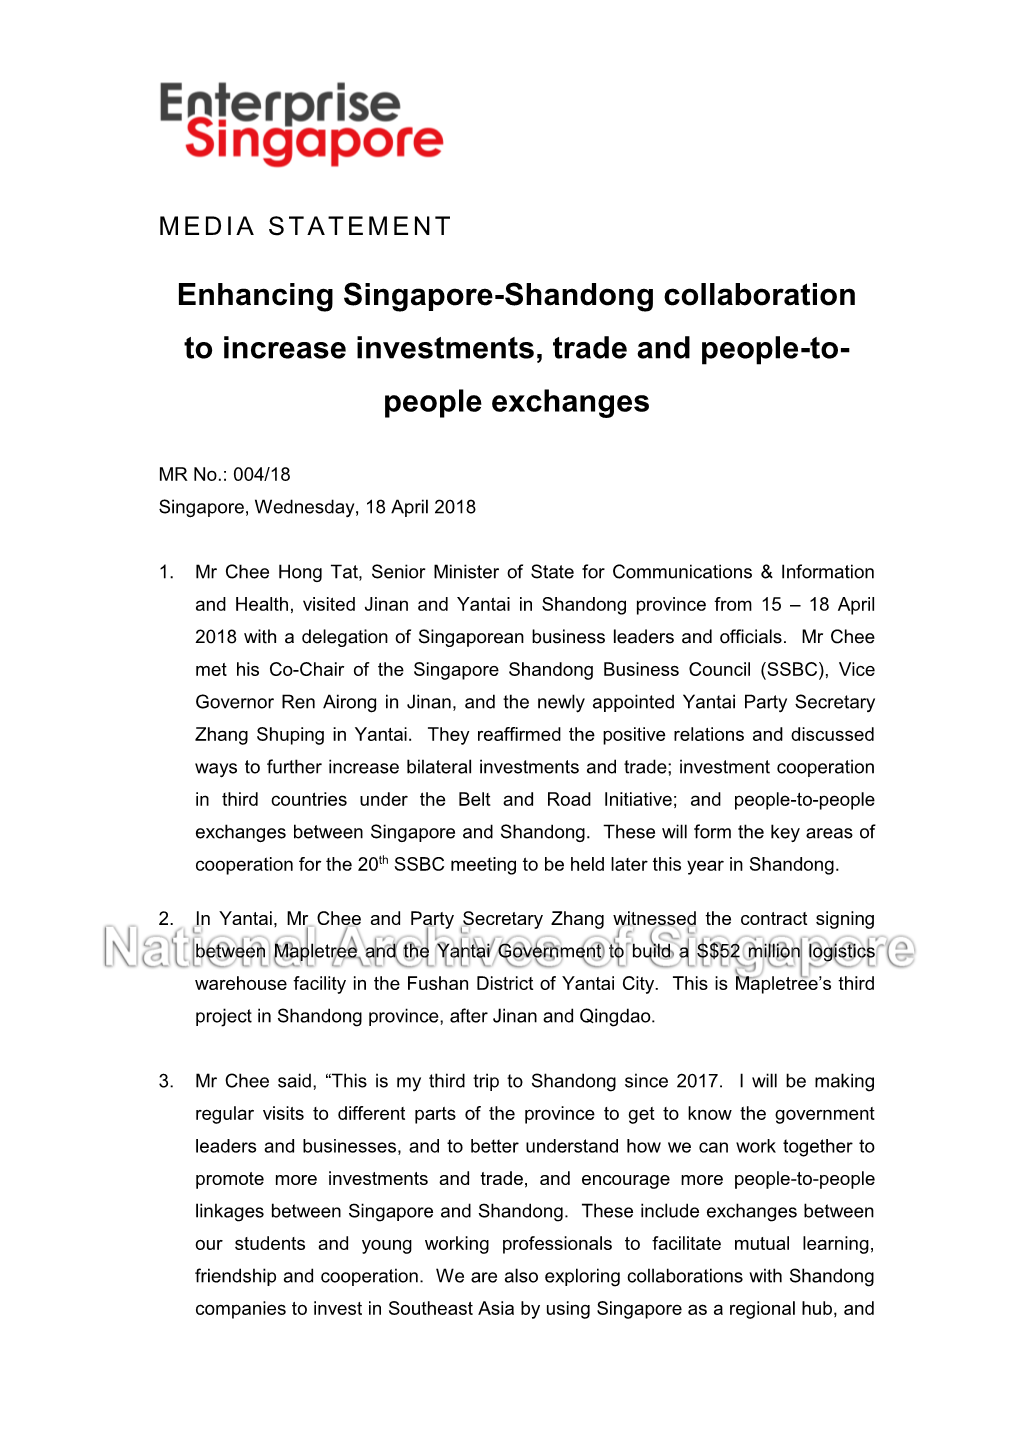 Enhancing Singapore-Shandong Collaboration to Increase Investments, Trade and People-To- People Exchanges